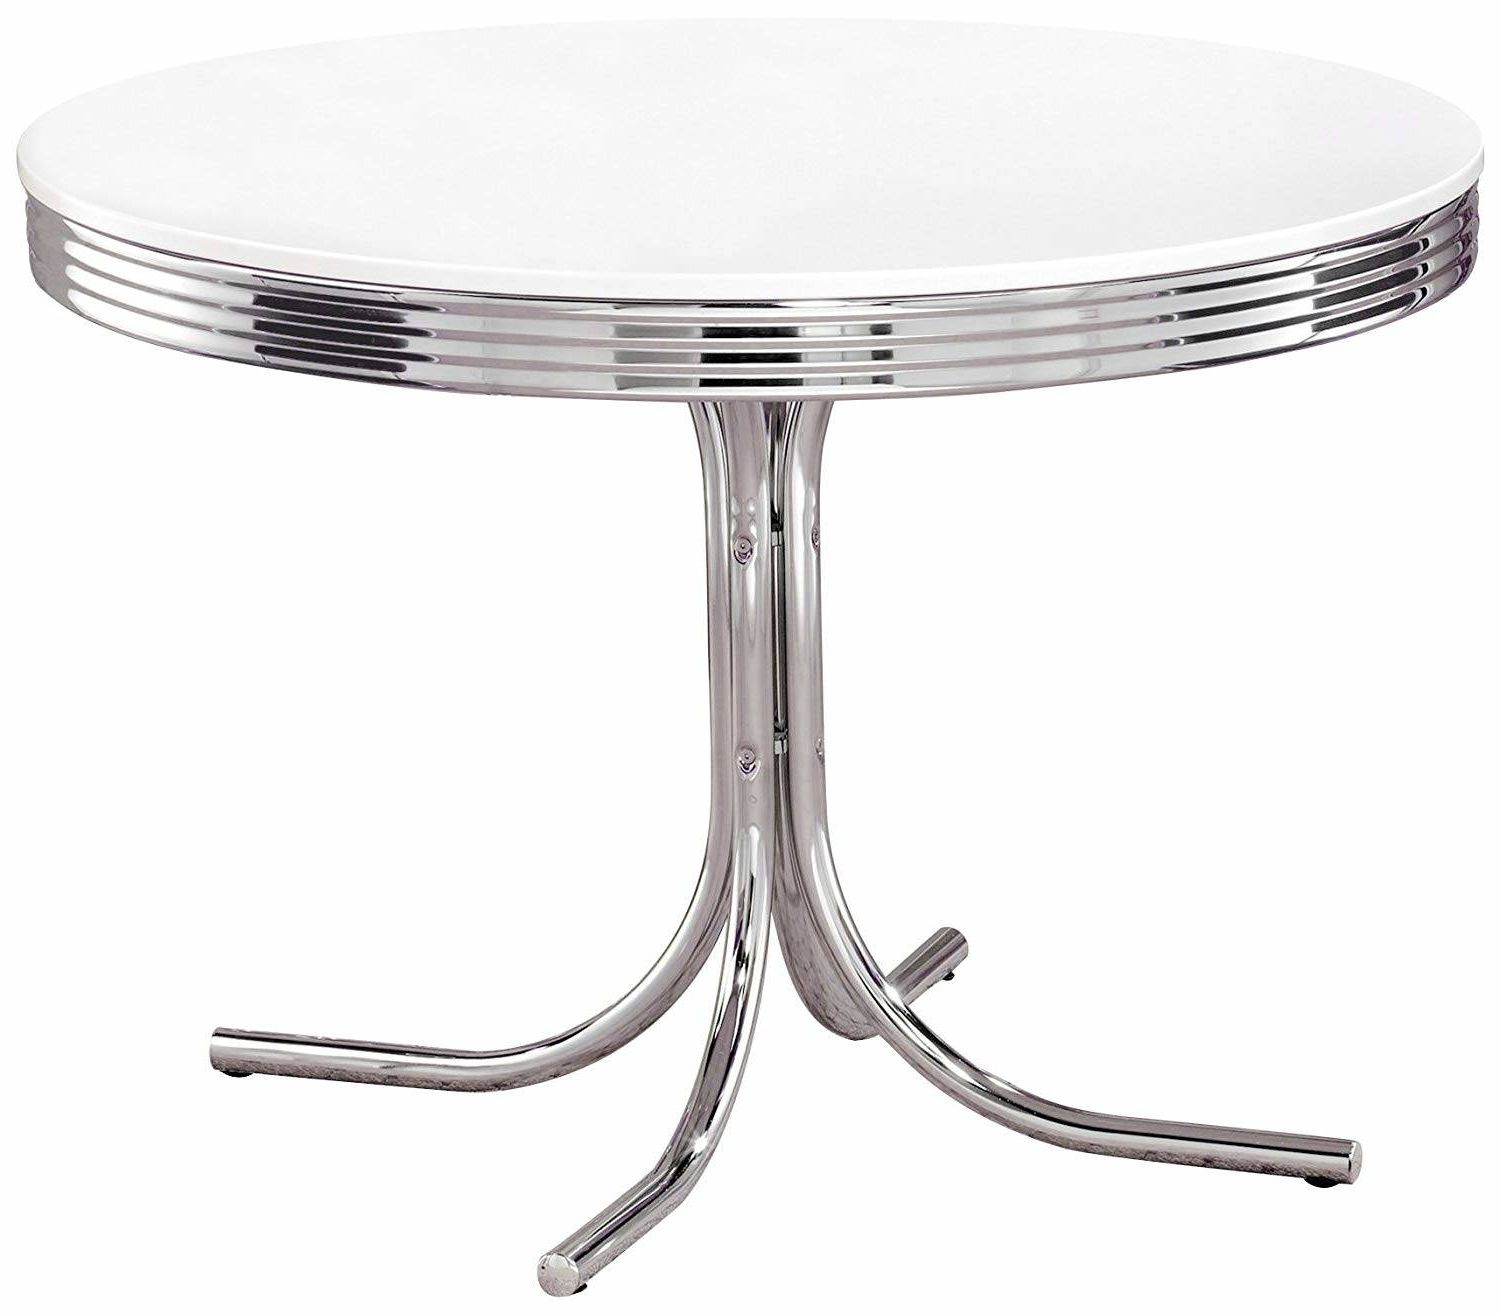 Retro Round Glasstop Dining Tables Regarding Most Up To Date Furniture Magnificent Retro Diner Table And Chairs Jukebox (View 23 of 30)